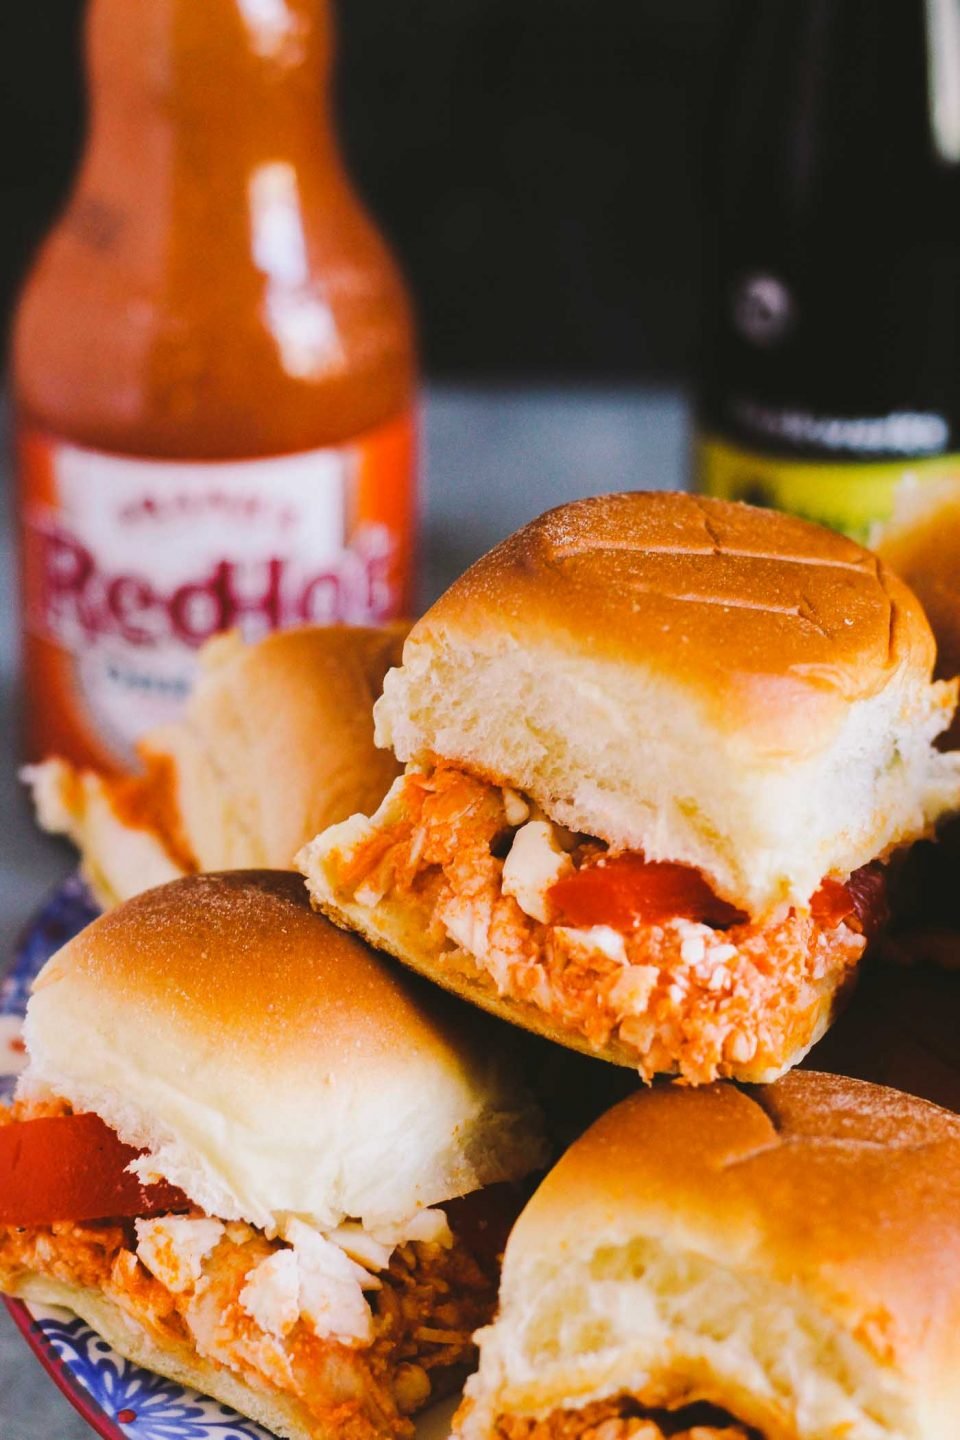 buffalo chicken sliders make the perfect game day snack & the best part is that they come together in 20 minutes from start to finish & feed a crowd of up to 12 people…it doesn’t get easier than that! | game day recipe, easy entertaining, buffalo chicken recipe, sliders recipe |